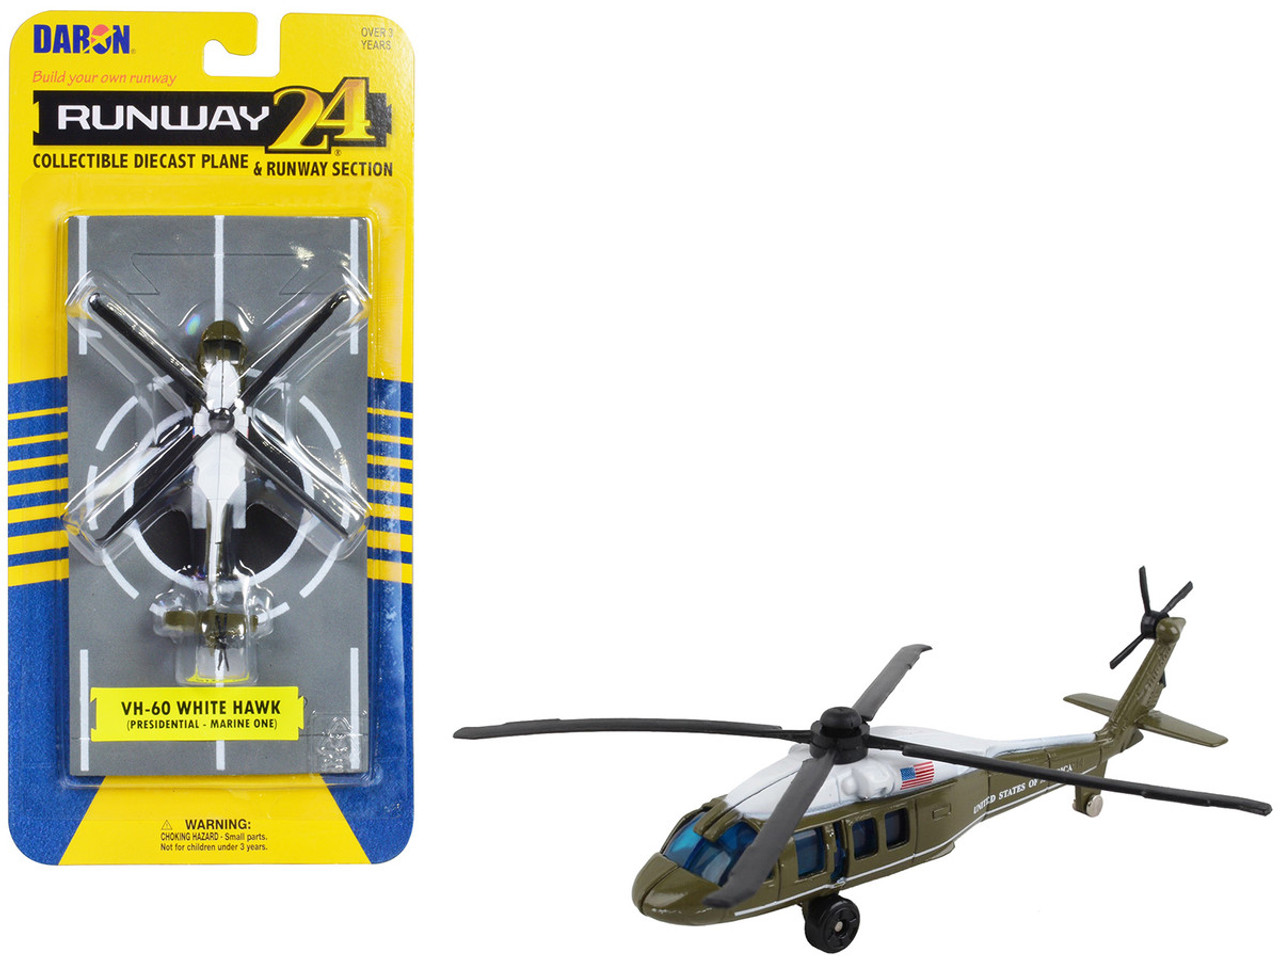 Sikorsky VH-60 White Hawk Helicopter Olive Drab with White Top 